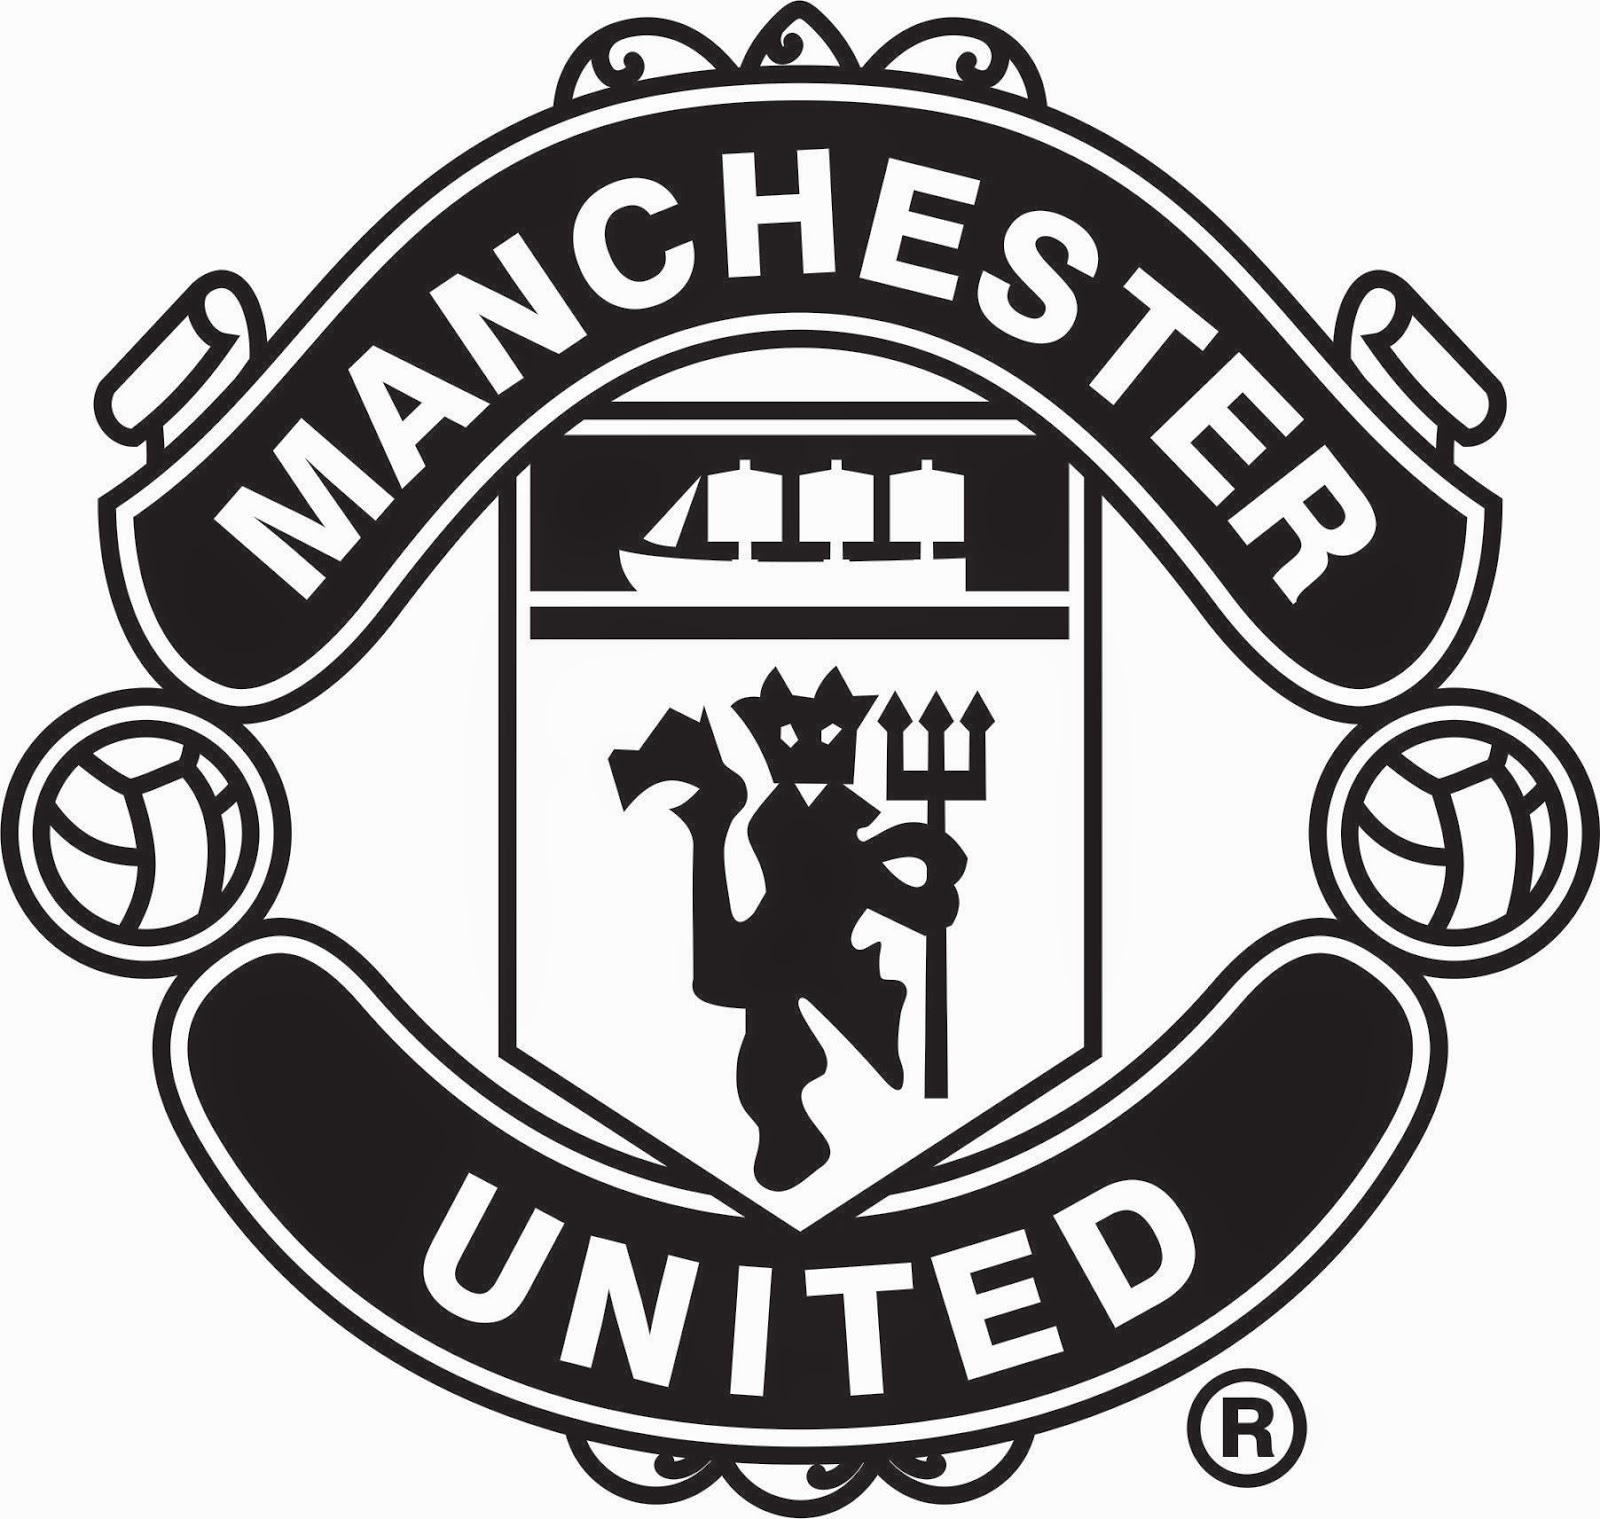  MANCHESTER  UNITED  LOGO VECTOR AI EPS CDR FREE DOWNLOAD 